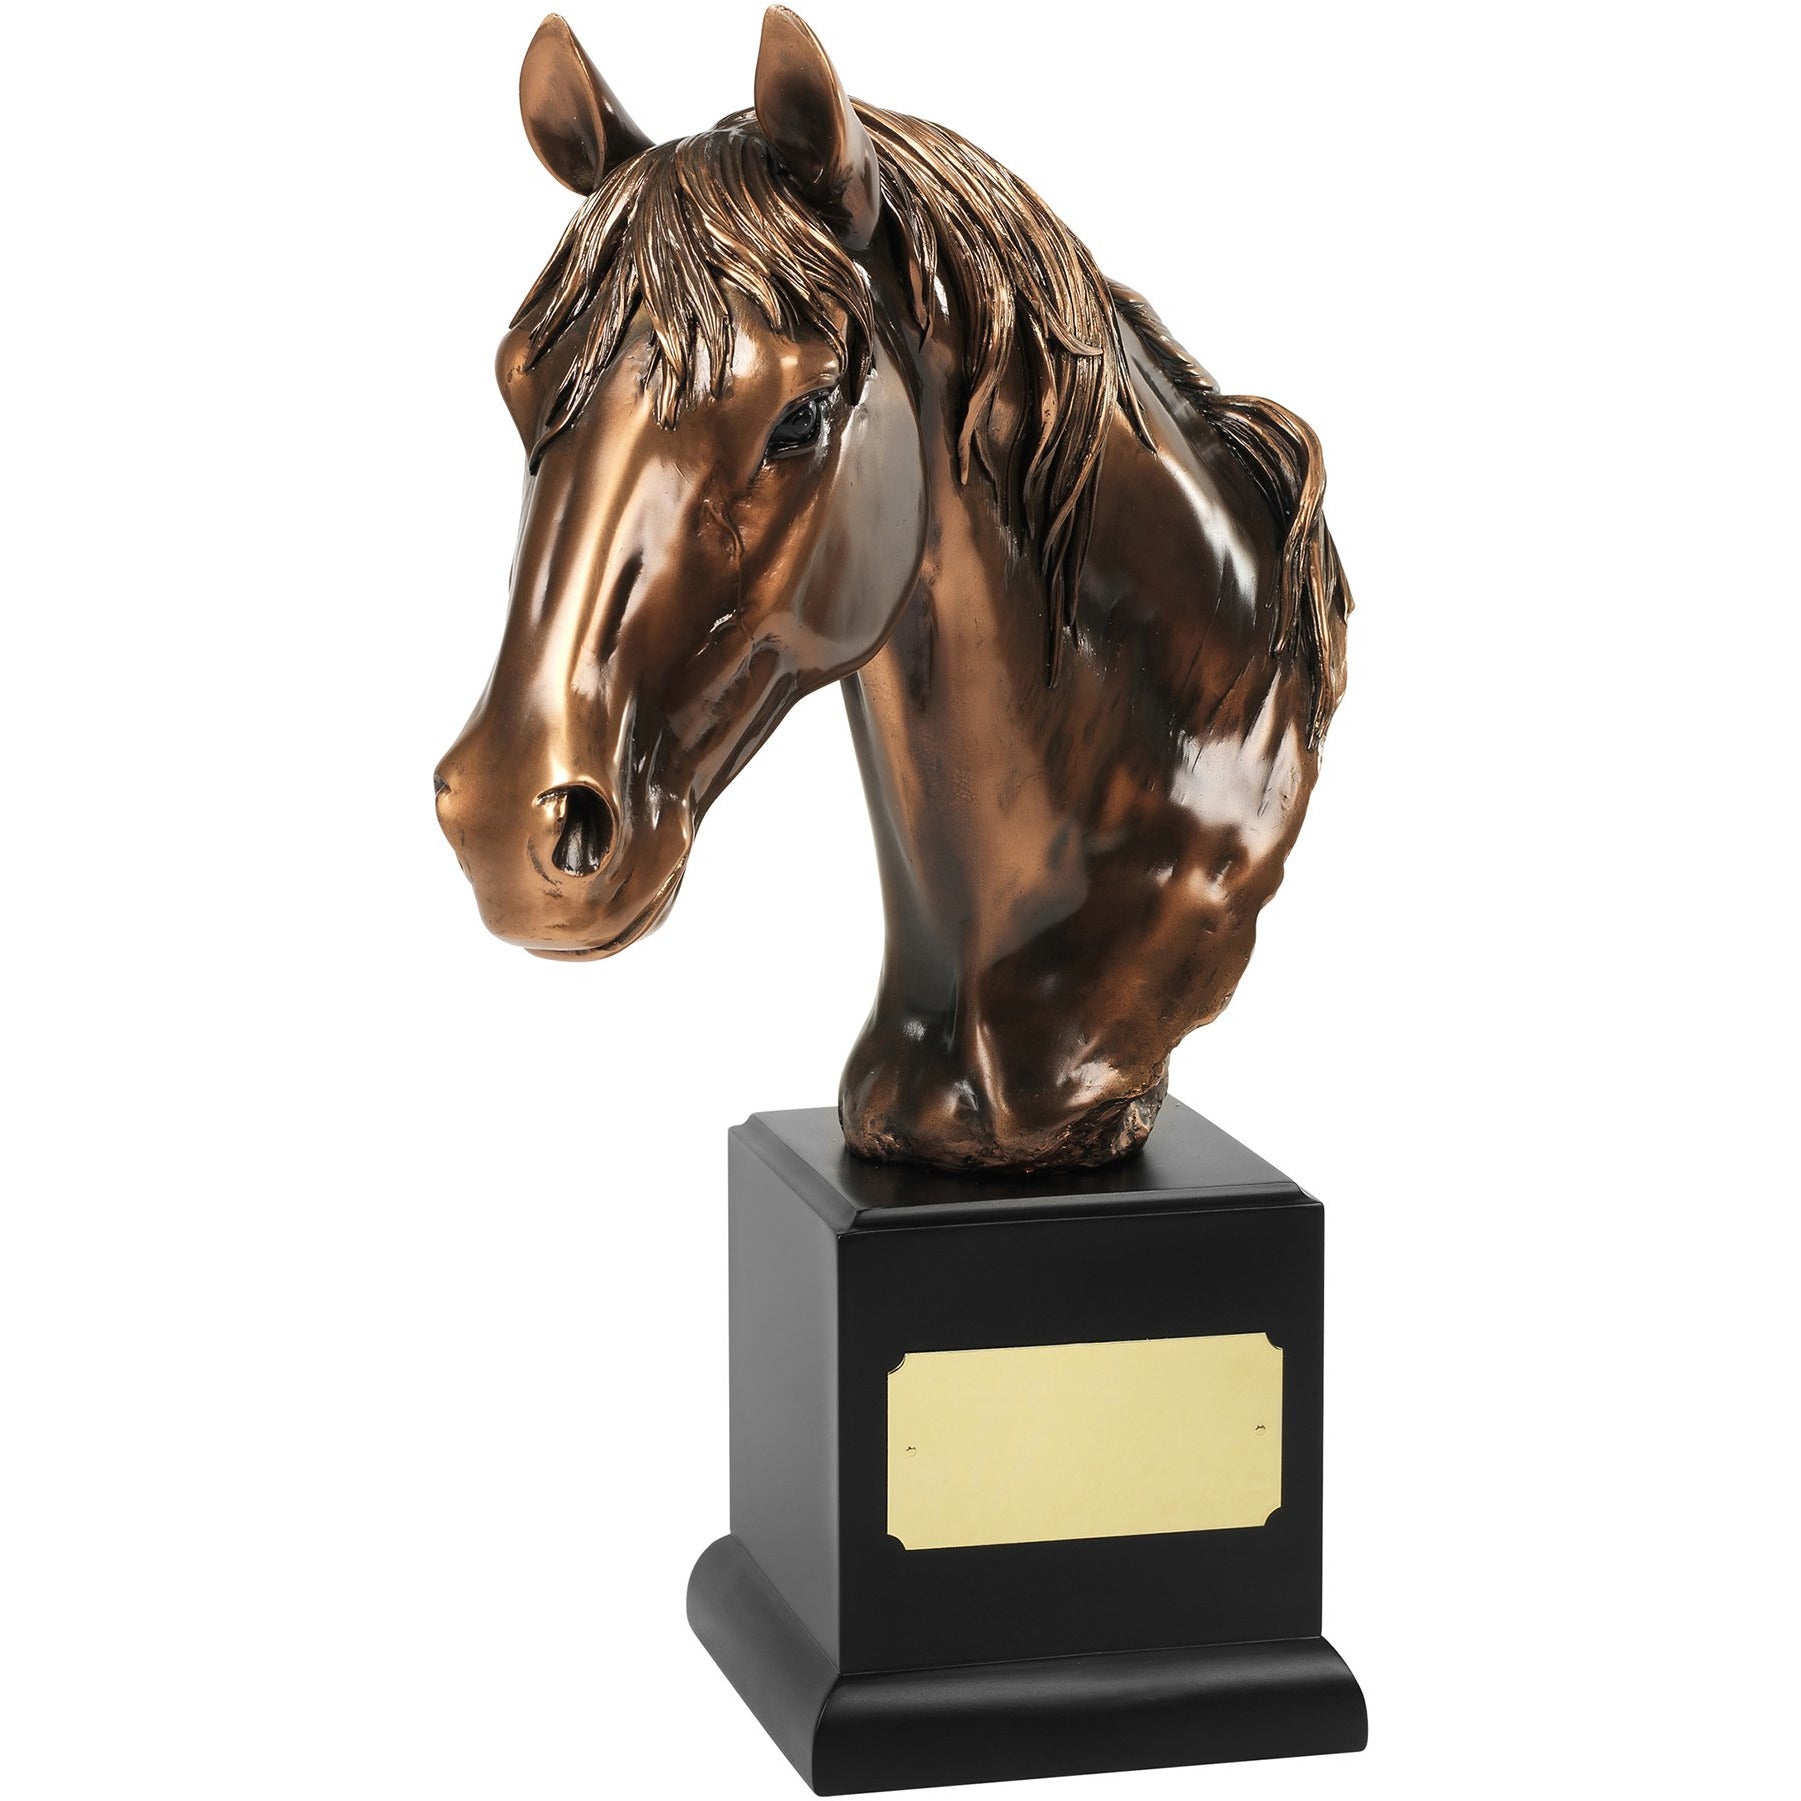 14 X 10in Bronze Plated Horses Head Trophy